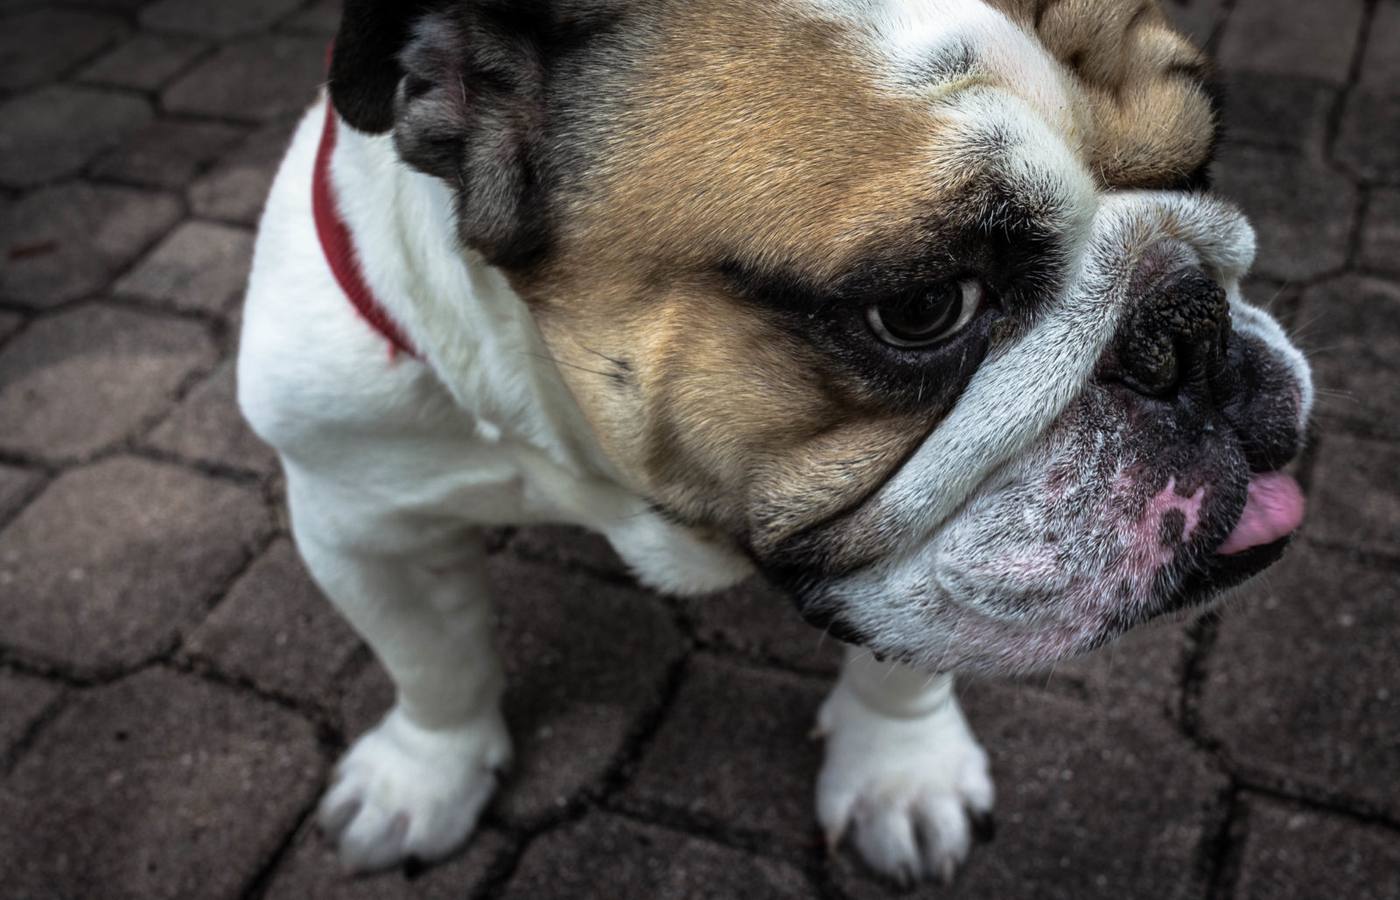 Why Bulldogs Are So Expensive and What Makes Them So Special